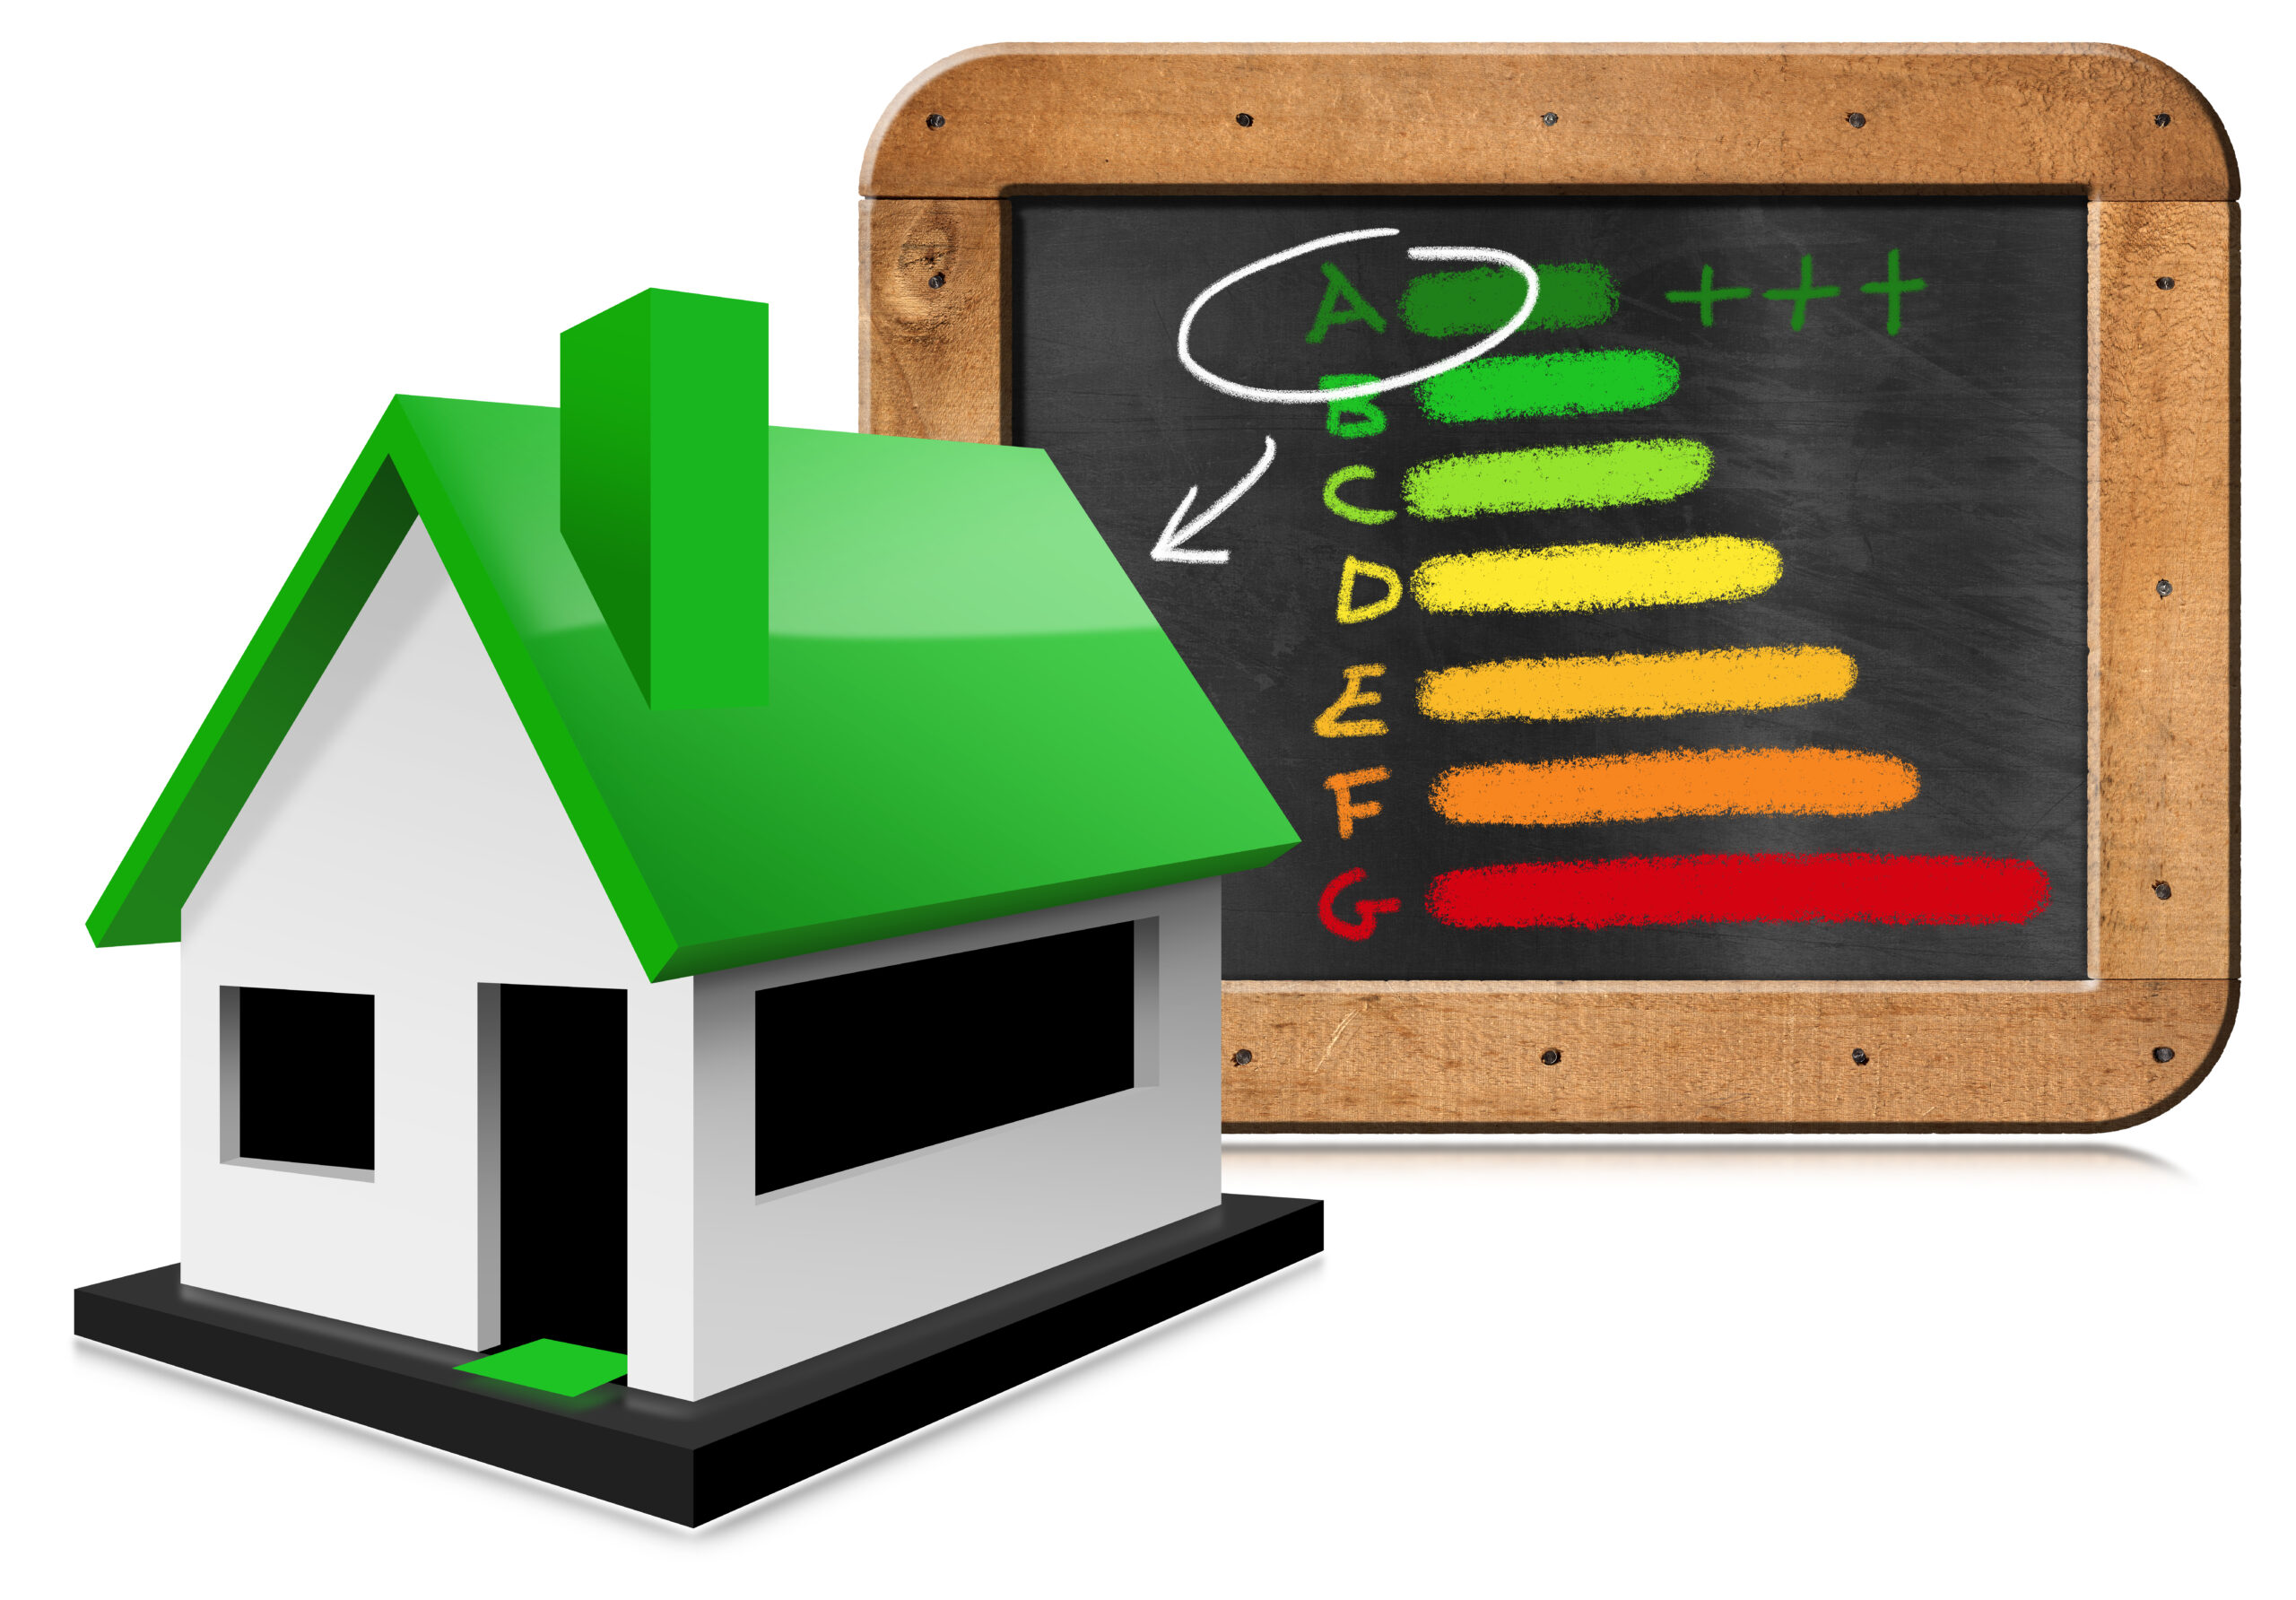 3D illustration of house energy efficiency rating with a chalk drawing of an energy performance chart on a blackboard with wooden frame.